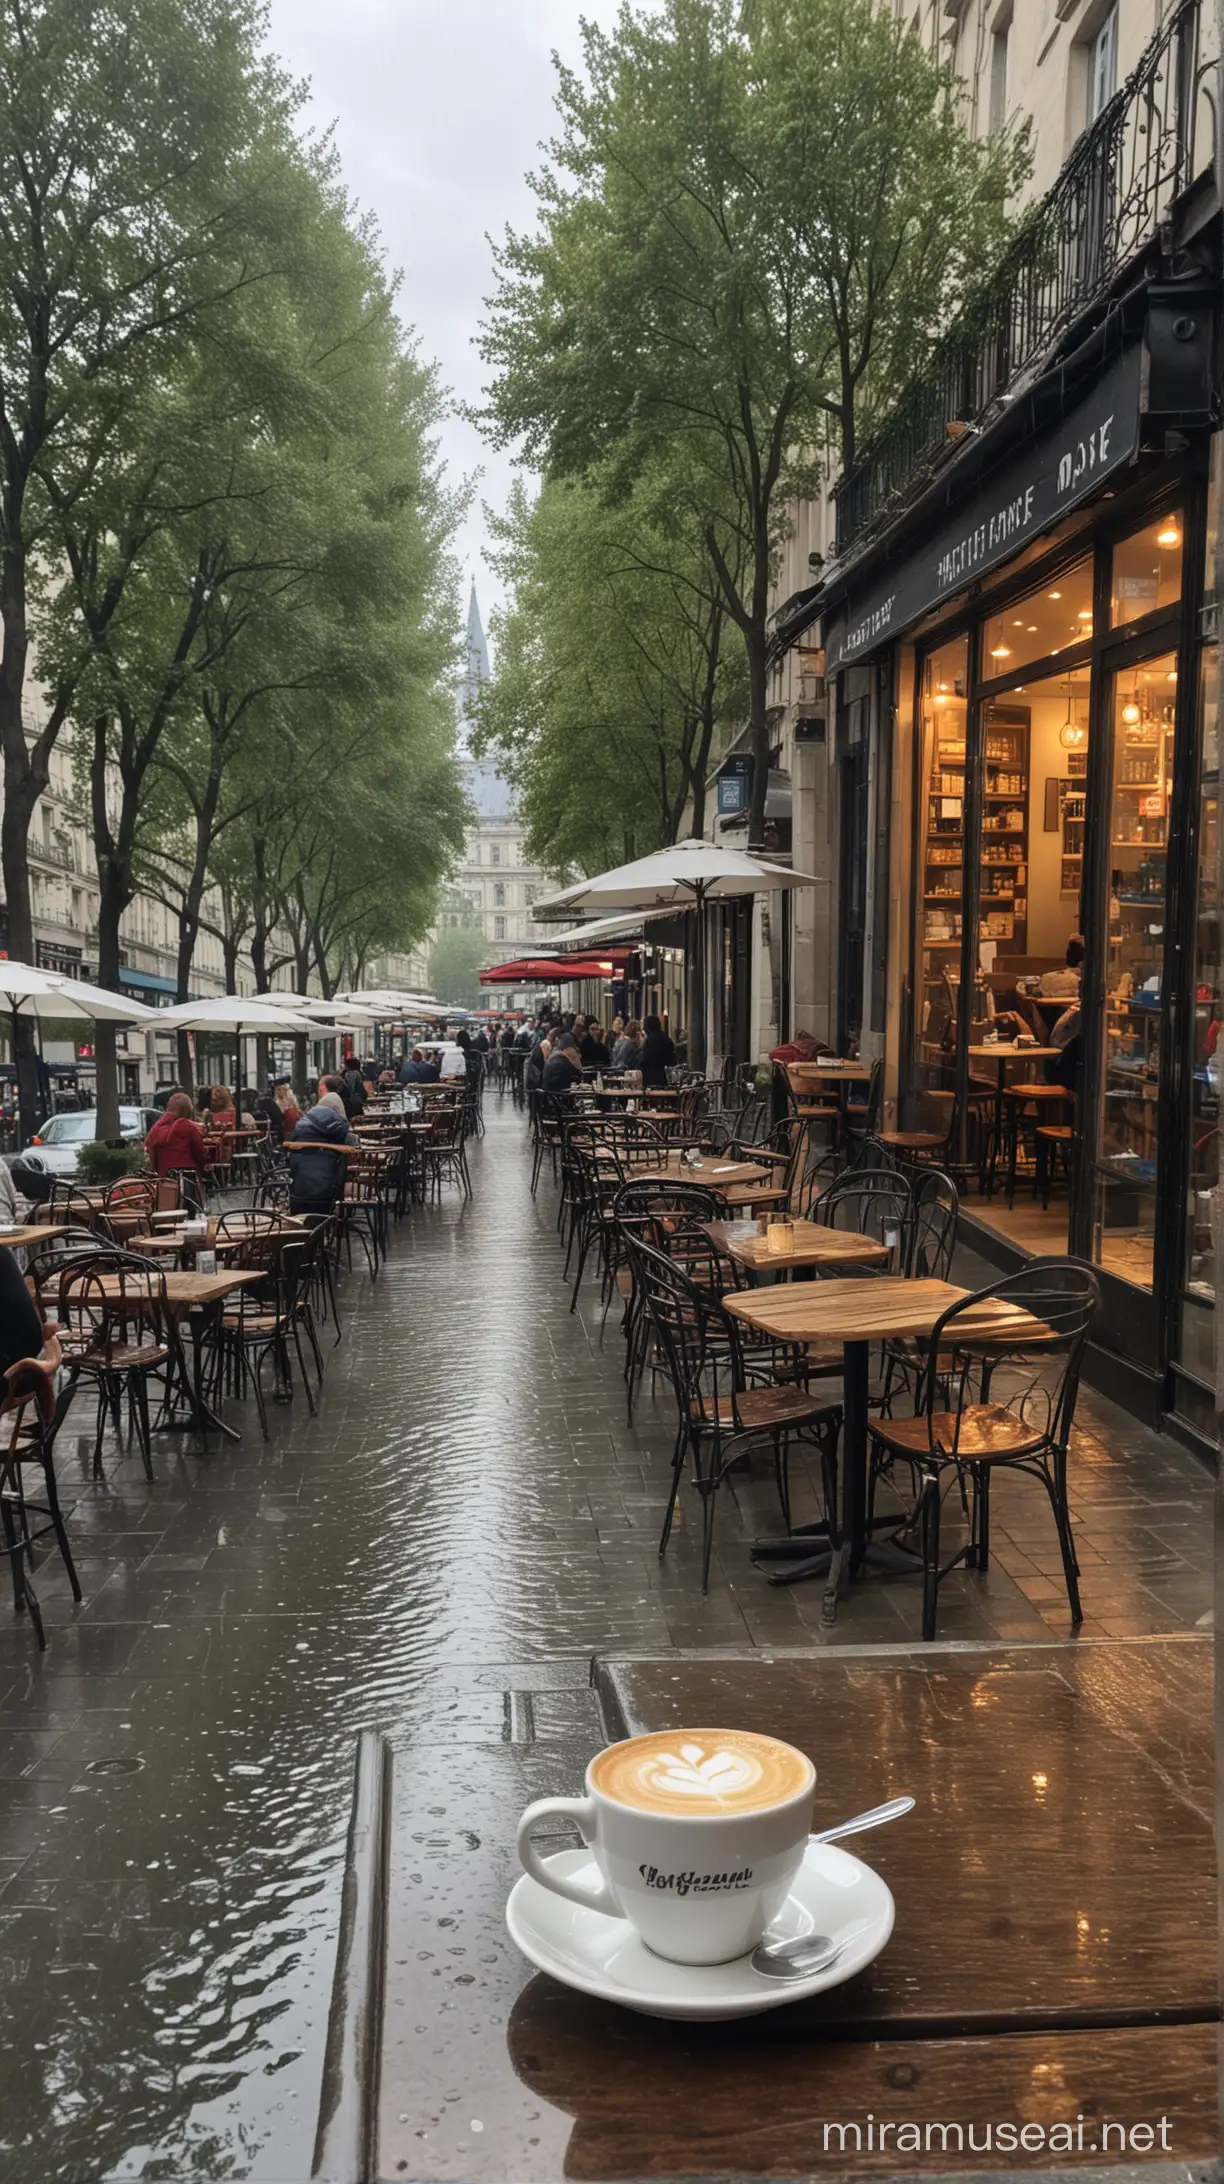 Serene Afternoon in a Parisian Cafe